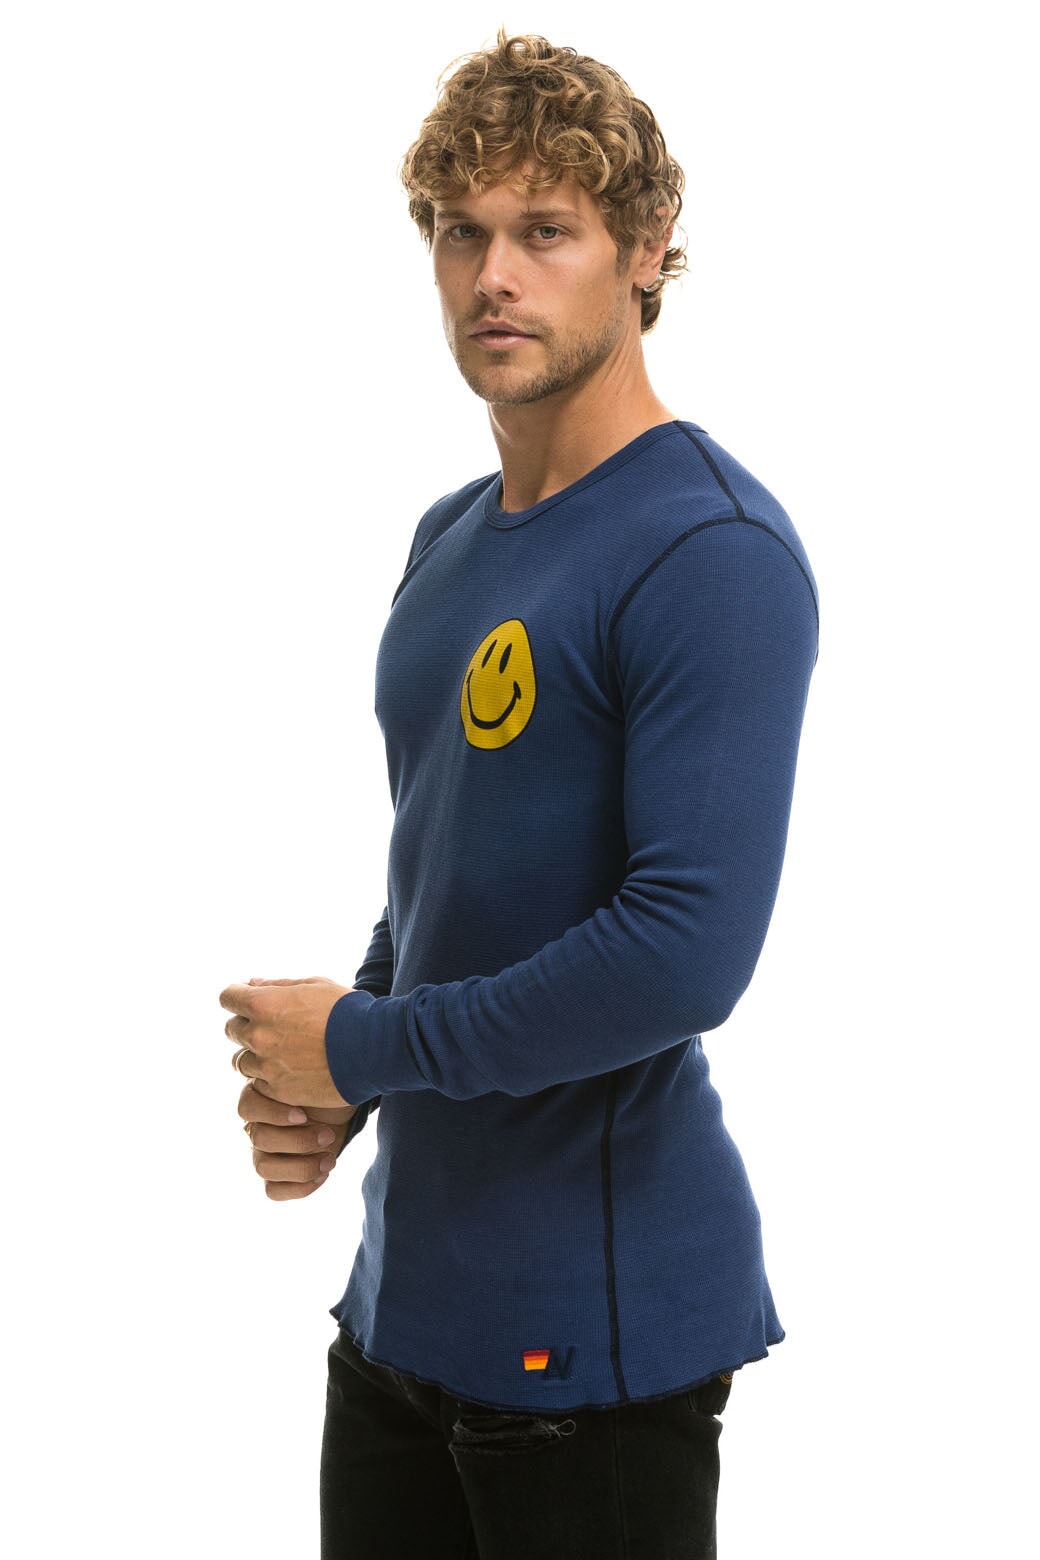 SMILEY 2 THERMAL - NAVY Thermal Aviator Nation 